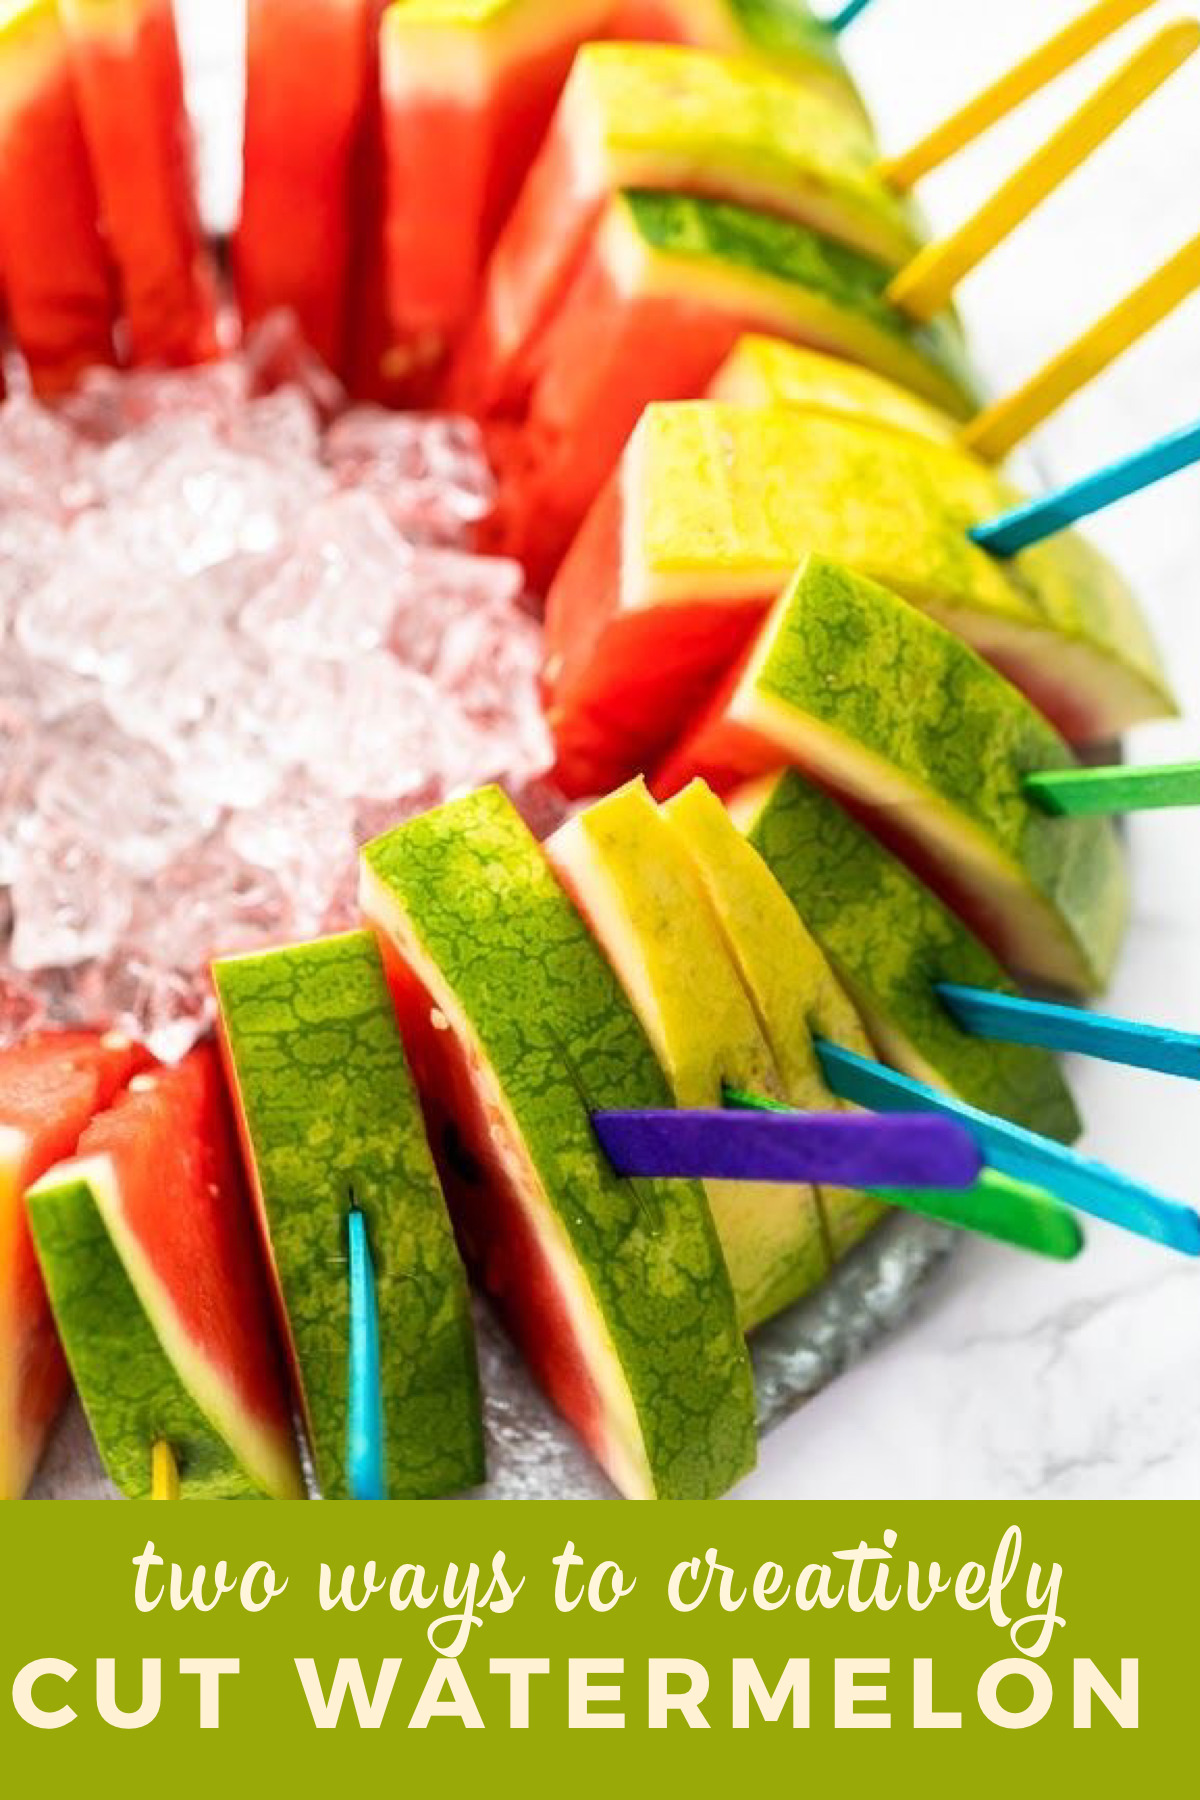 Two Ways to Creatively Cut Watermelon